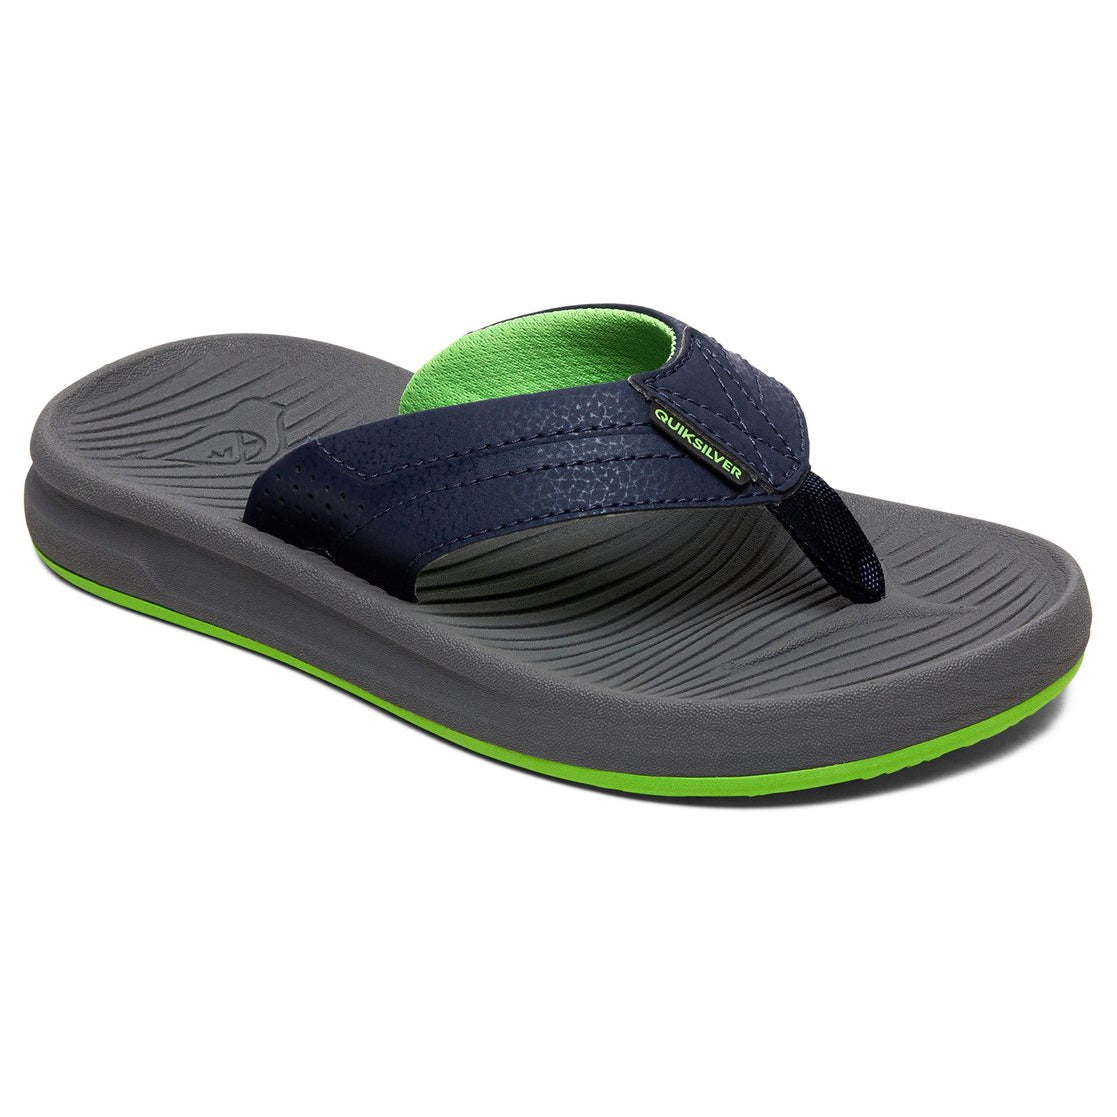 Quiksilver Oasis Youth Sandals XBSB-Blue-Grey-Blue 12 C